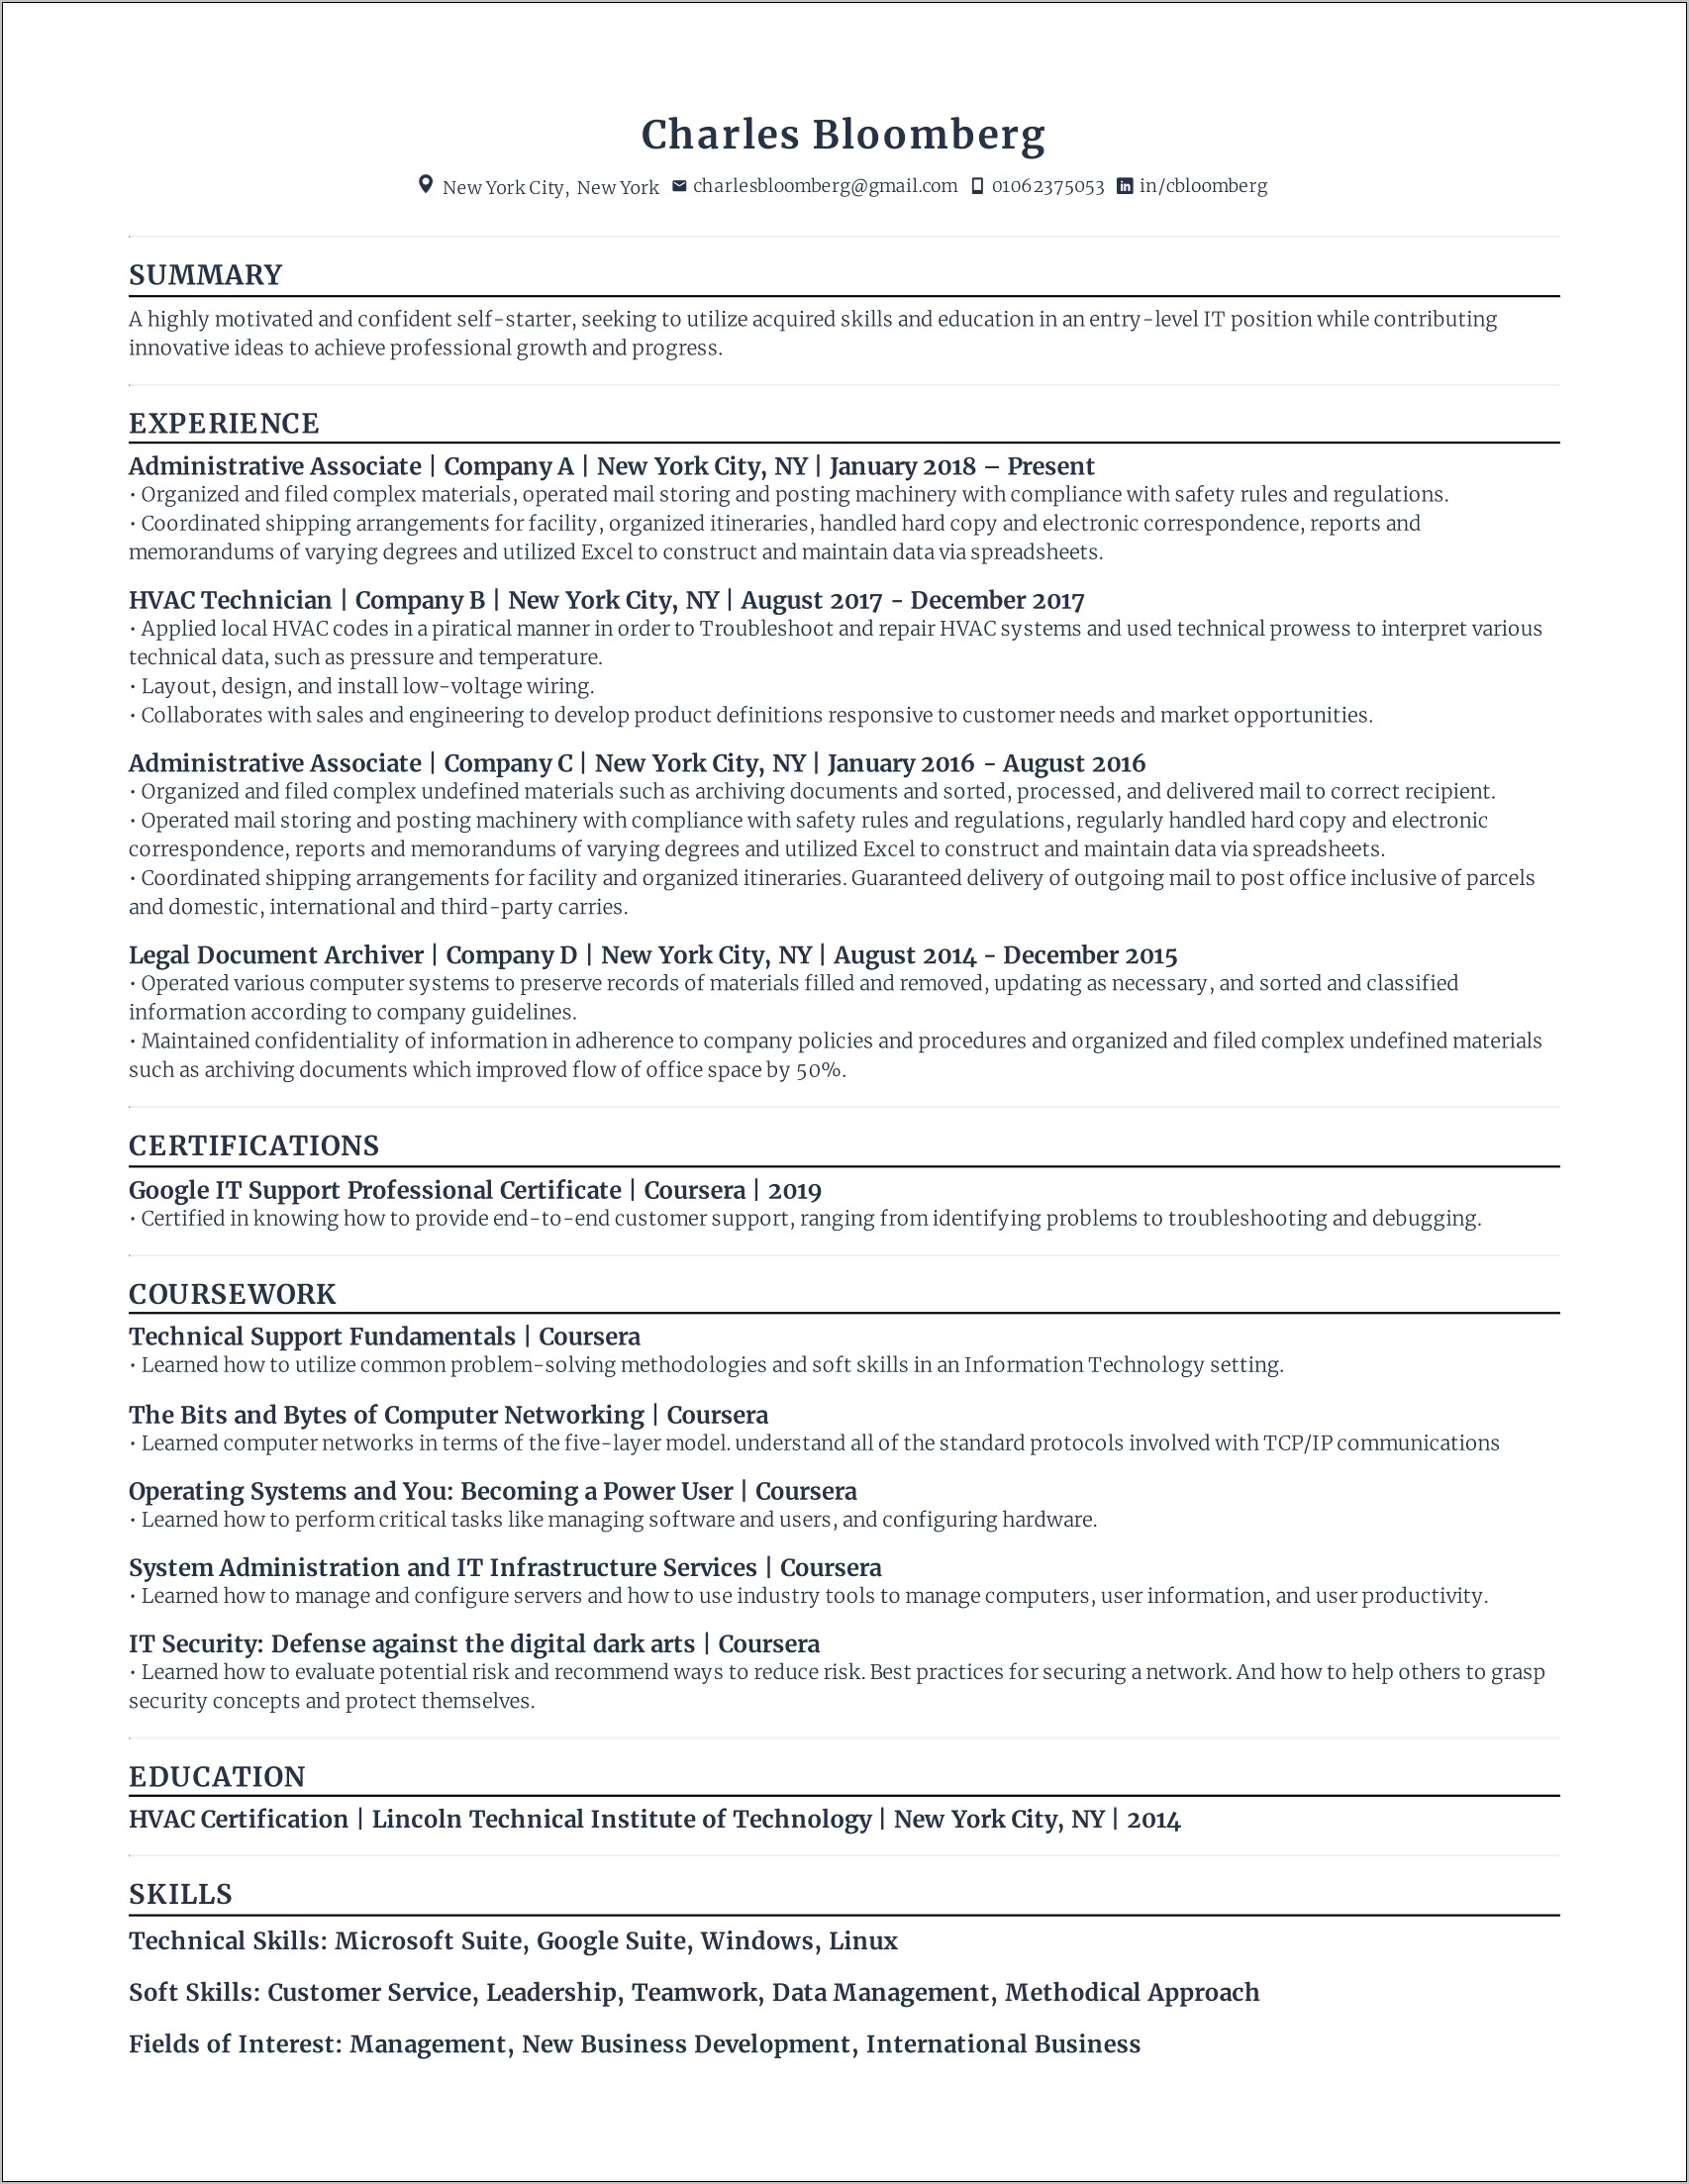 resume-background-summary-cut-and-paste-resume-example-gallery